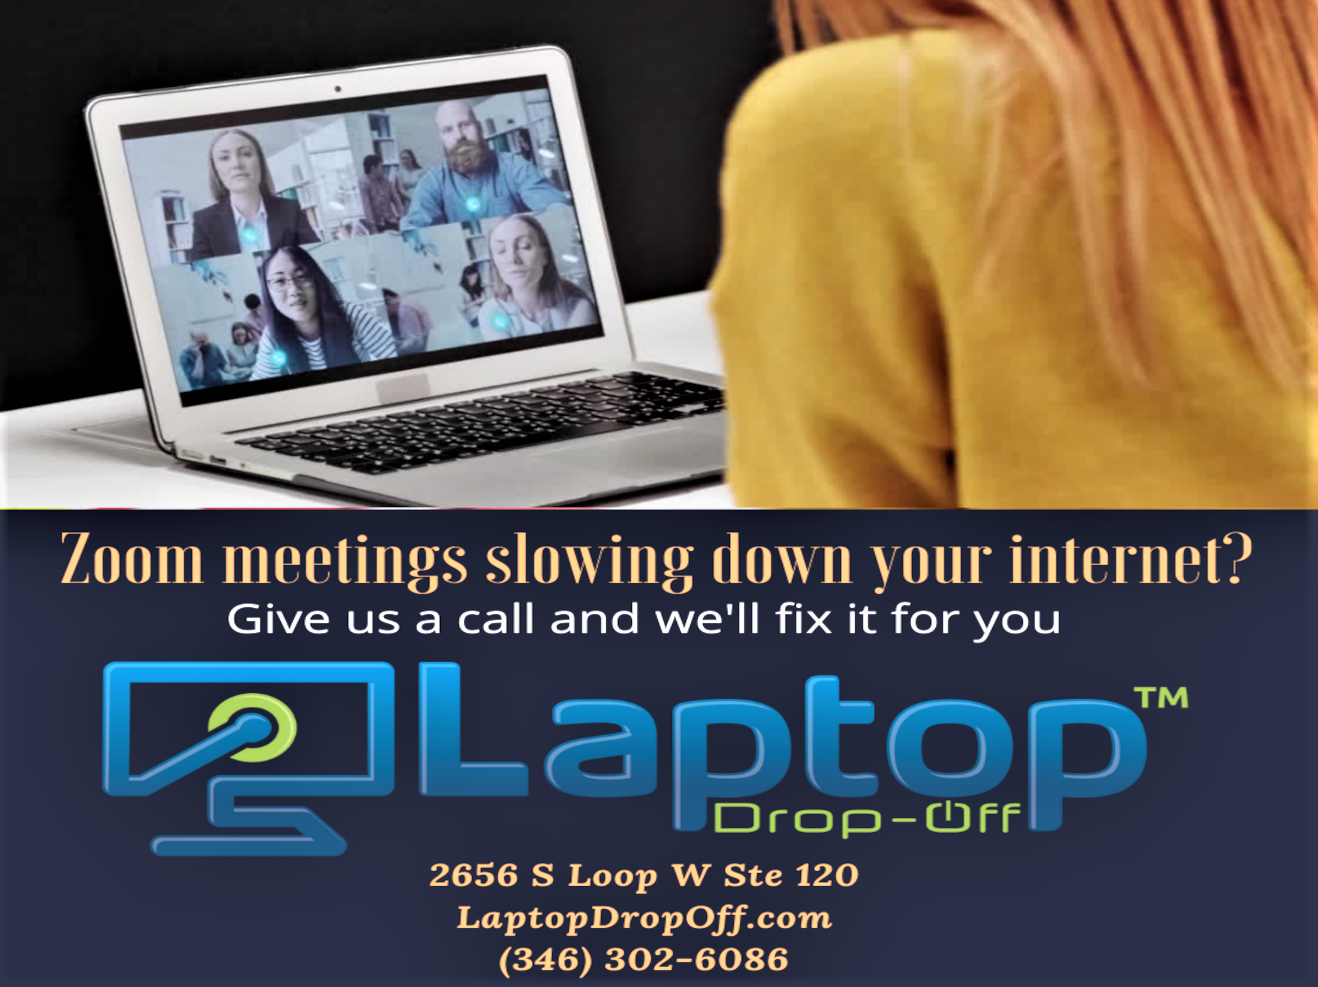 Zoom meetings slowing down vour internet?

Give us a call and we'll fix it for you

a de]

2656 S Loop W Ste 120
LaptopDropOff.com
(346) 302-6086